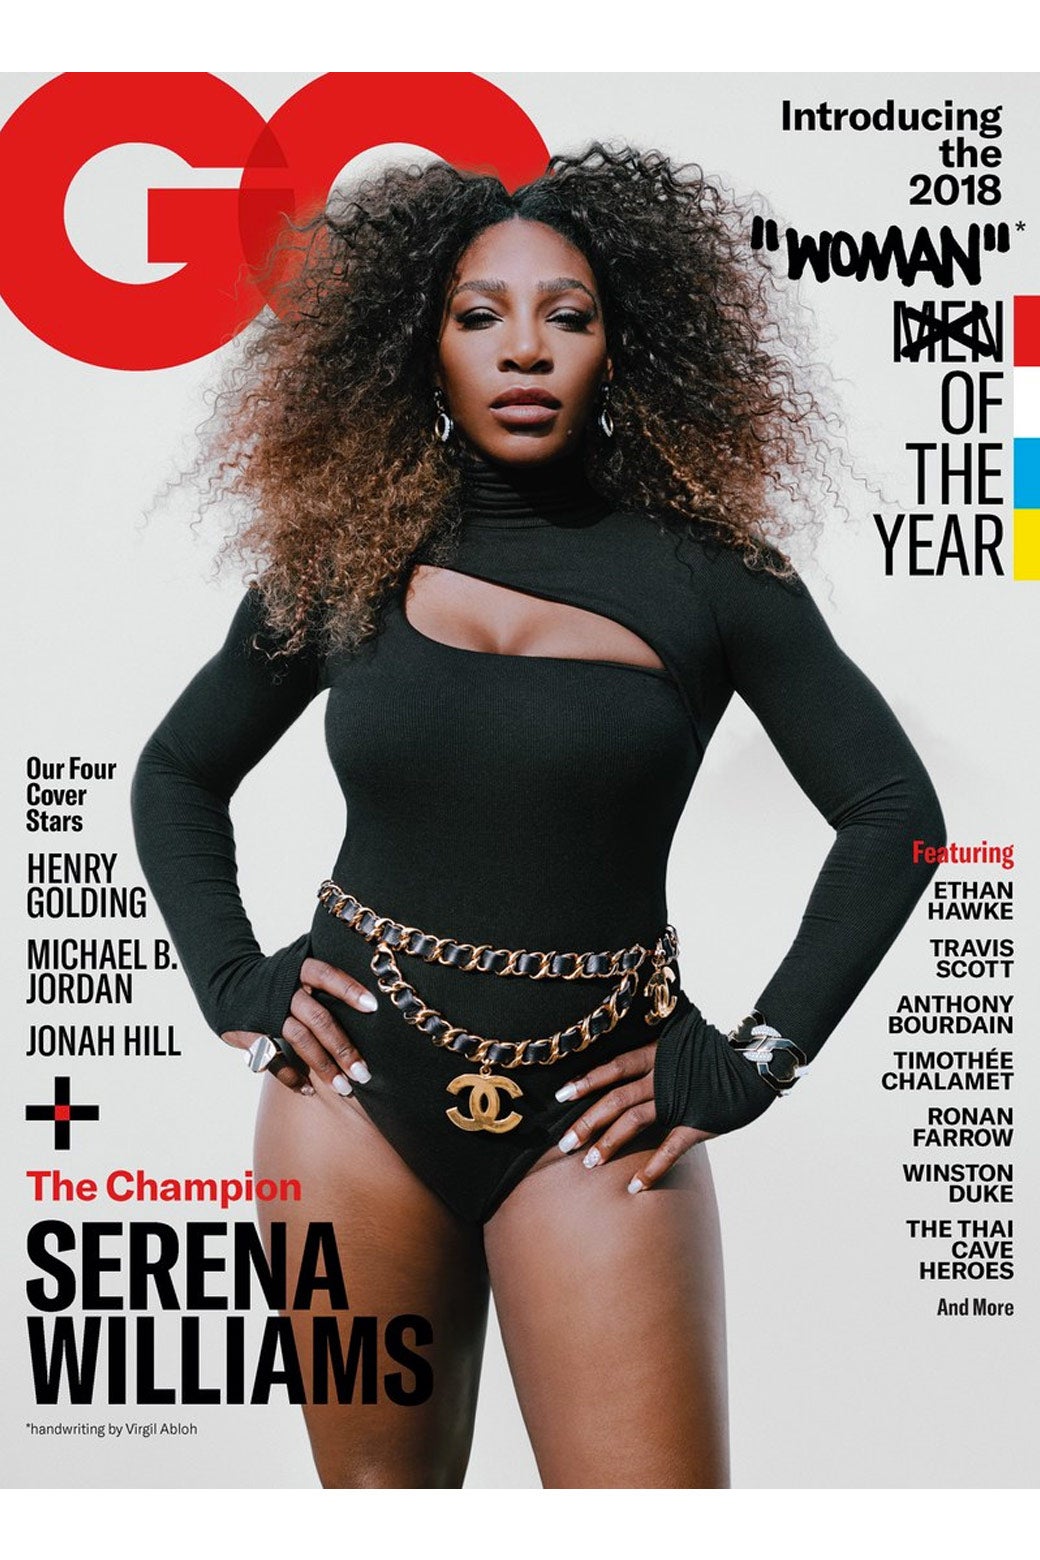 Serena Williams on the cover of GQ magazine.